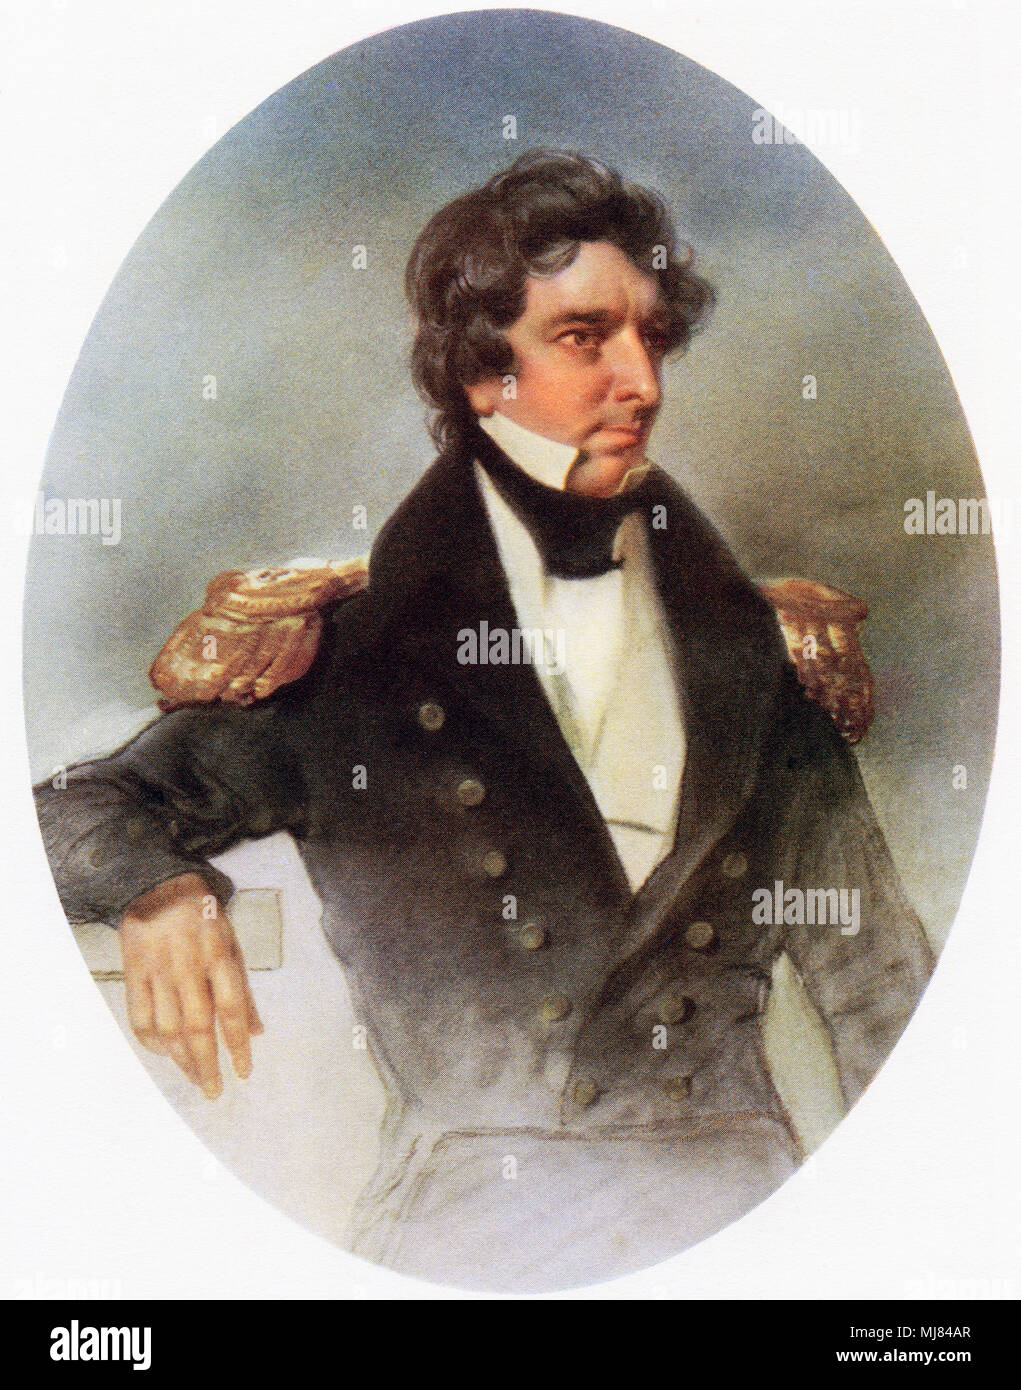 Sir James Clark Ross, 1800 – 1862.  British naval officer and explorer.  From British Polar Explorers, published 1943. Stock Photo